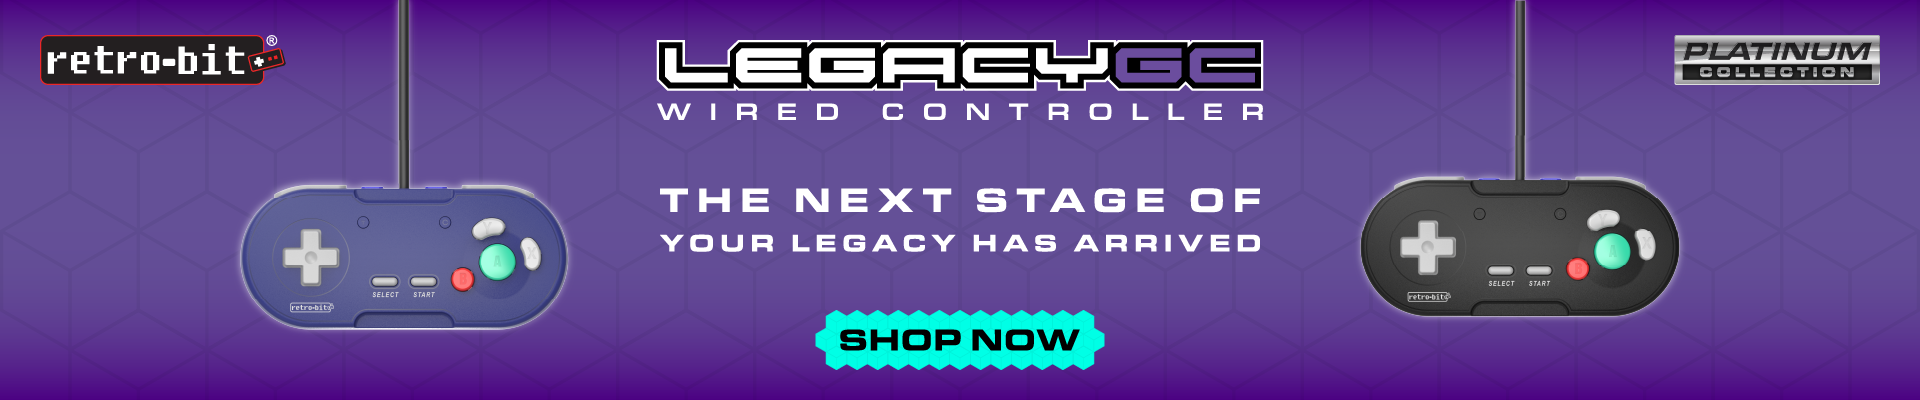 LegacyGC - The next stage of your legacy has arrived